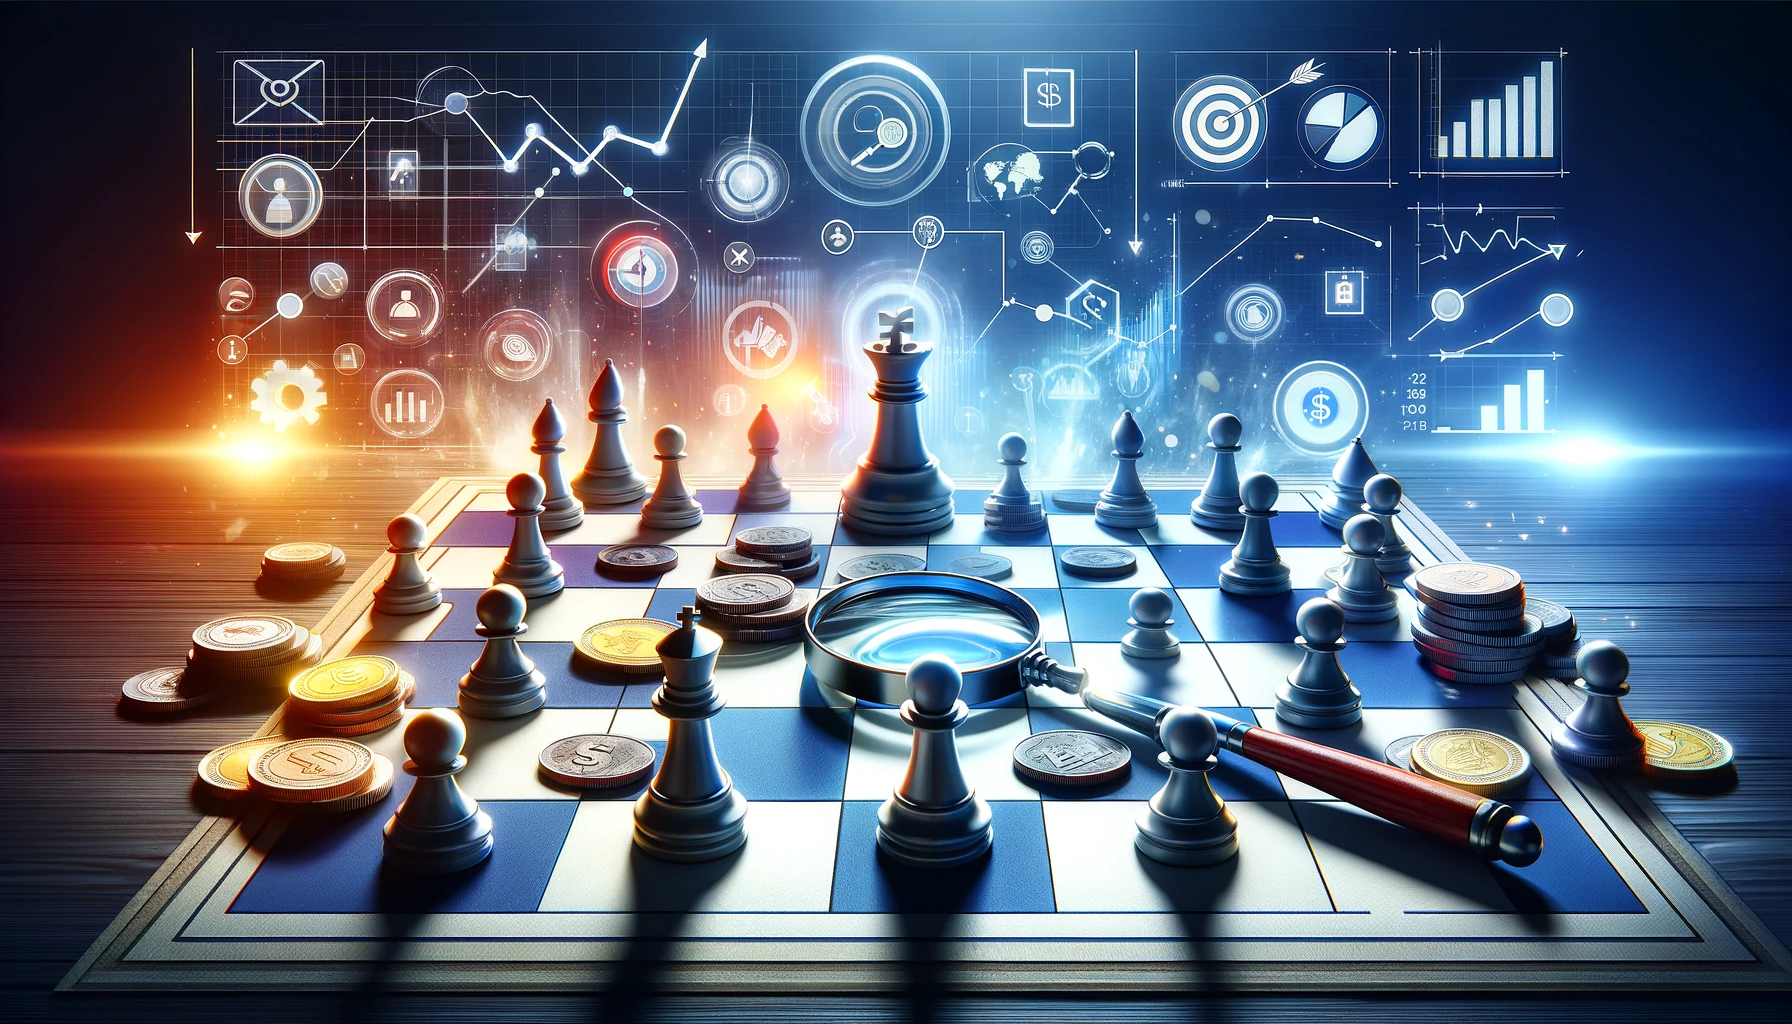 Image representing 'Adwords Strategies Unleashed', featuring a dynamic chessboard with icons such as a magnifying glass, a target, and coins instead of traditional chess pieces, set against a backdrop of analytical graphs, symbolizing strategic planning in Adwords campaigns.